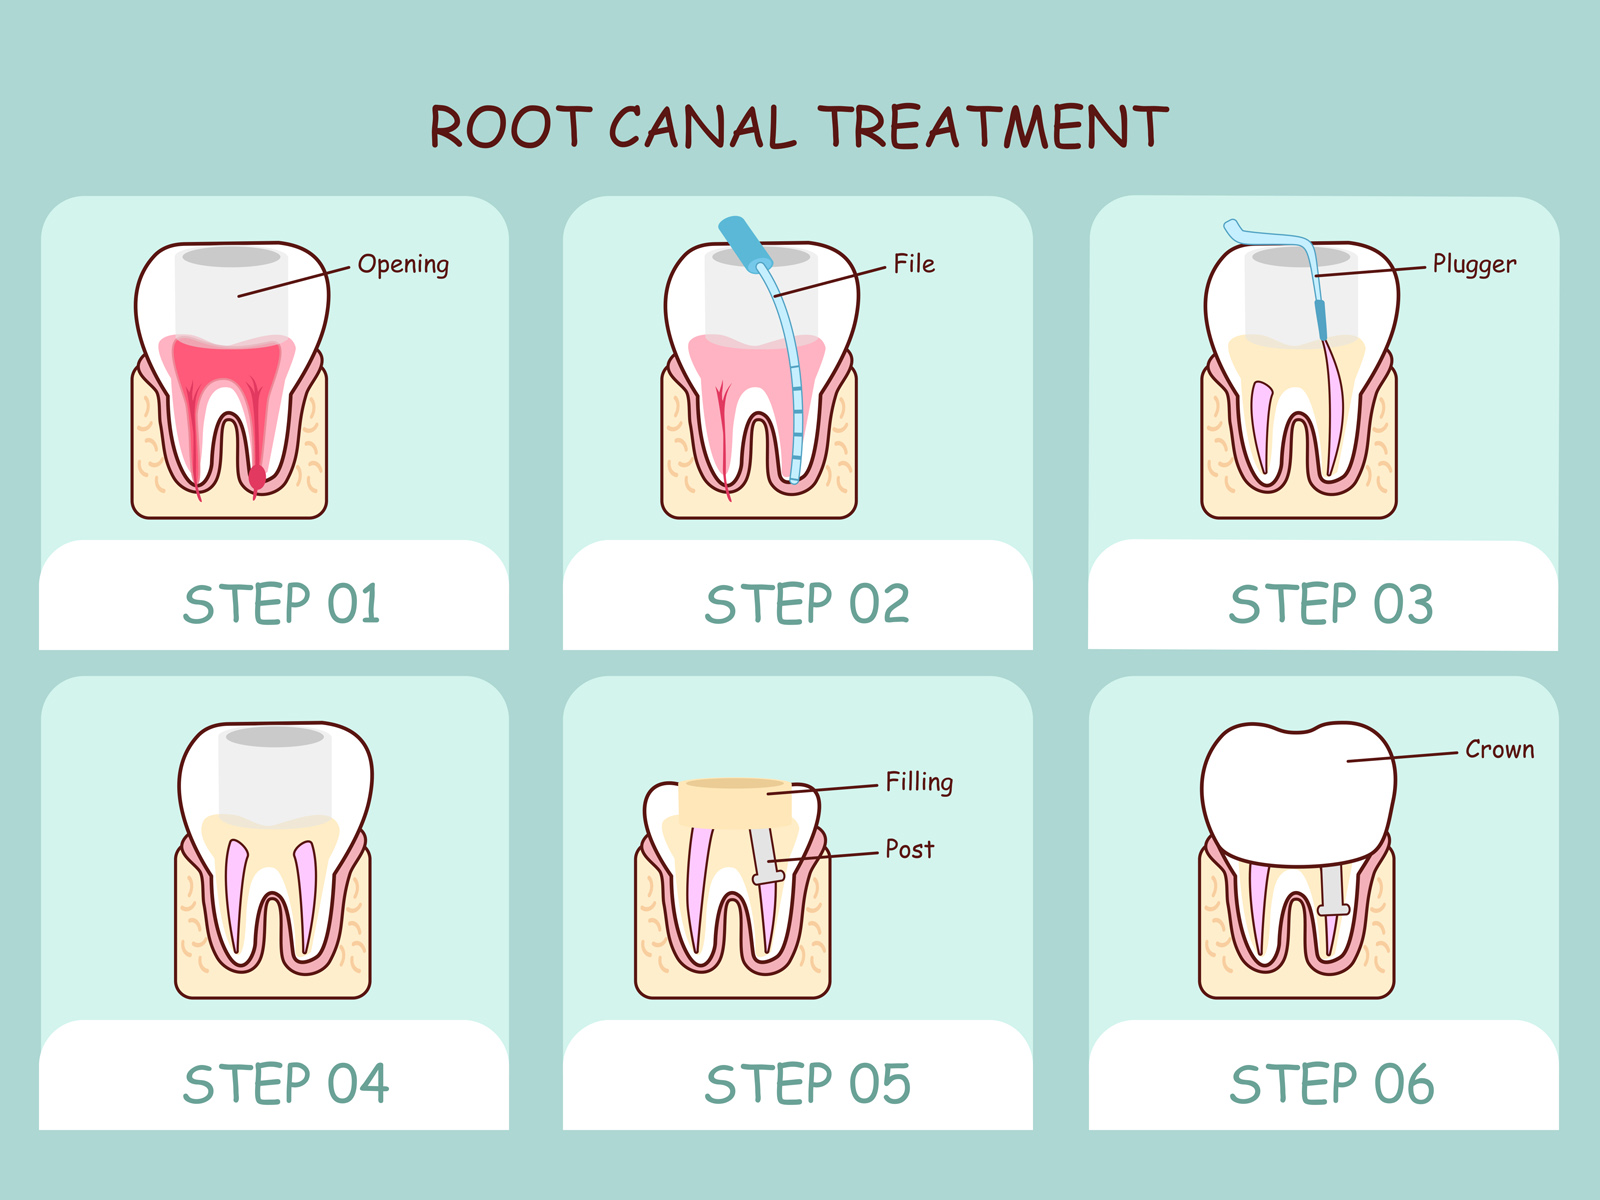 How long does root canal treatment last?